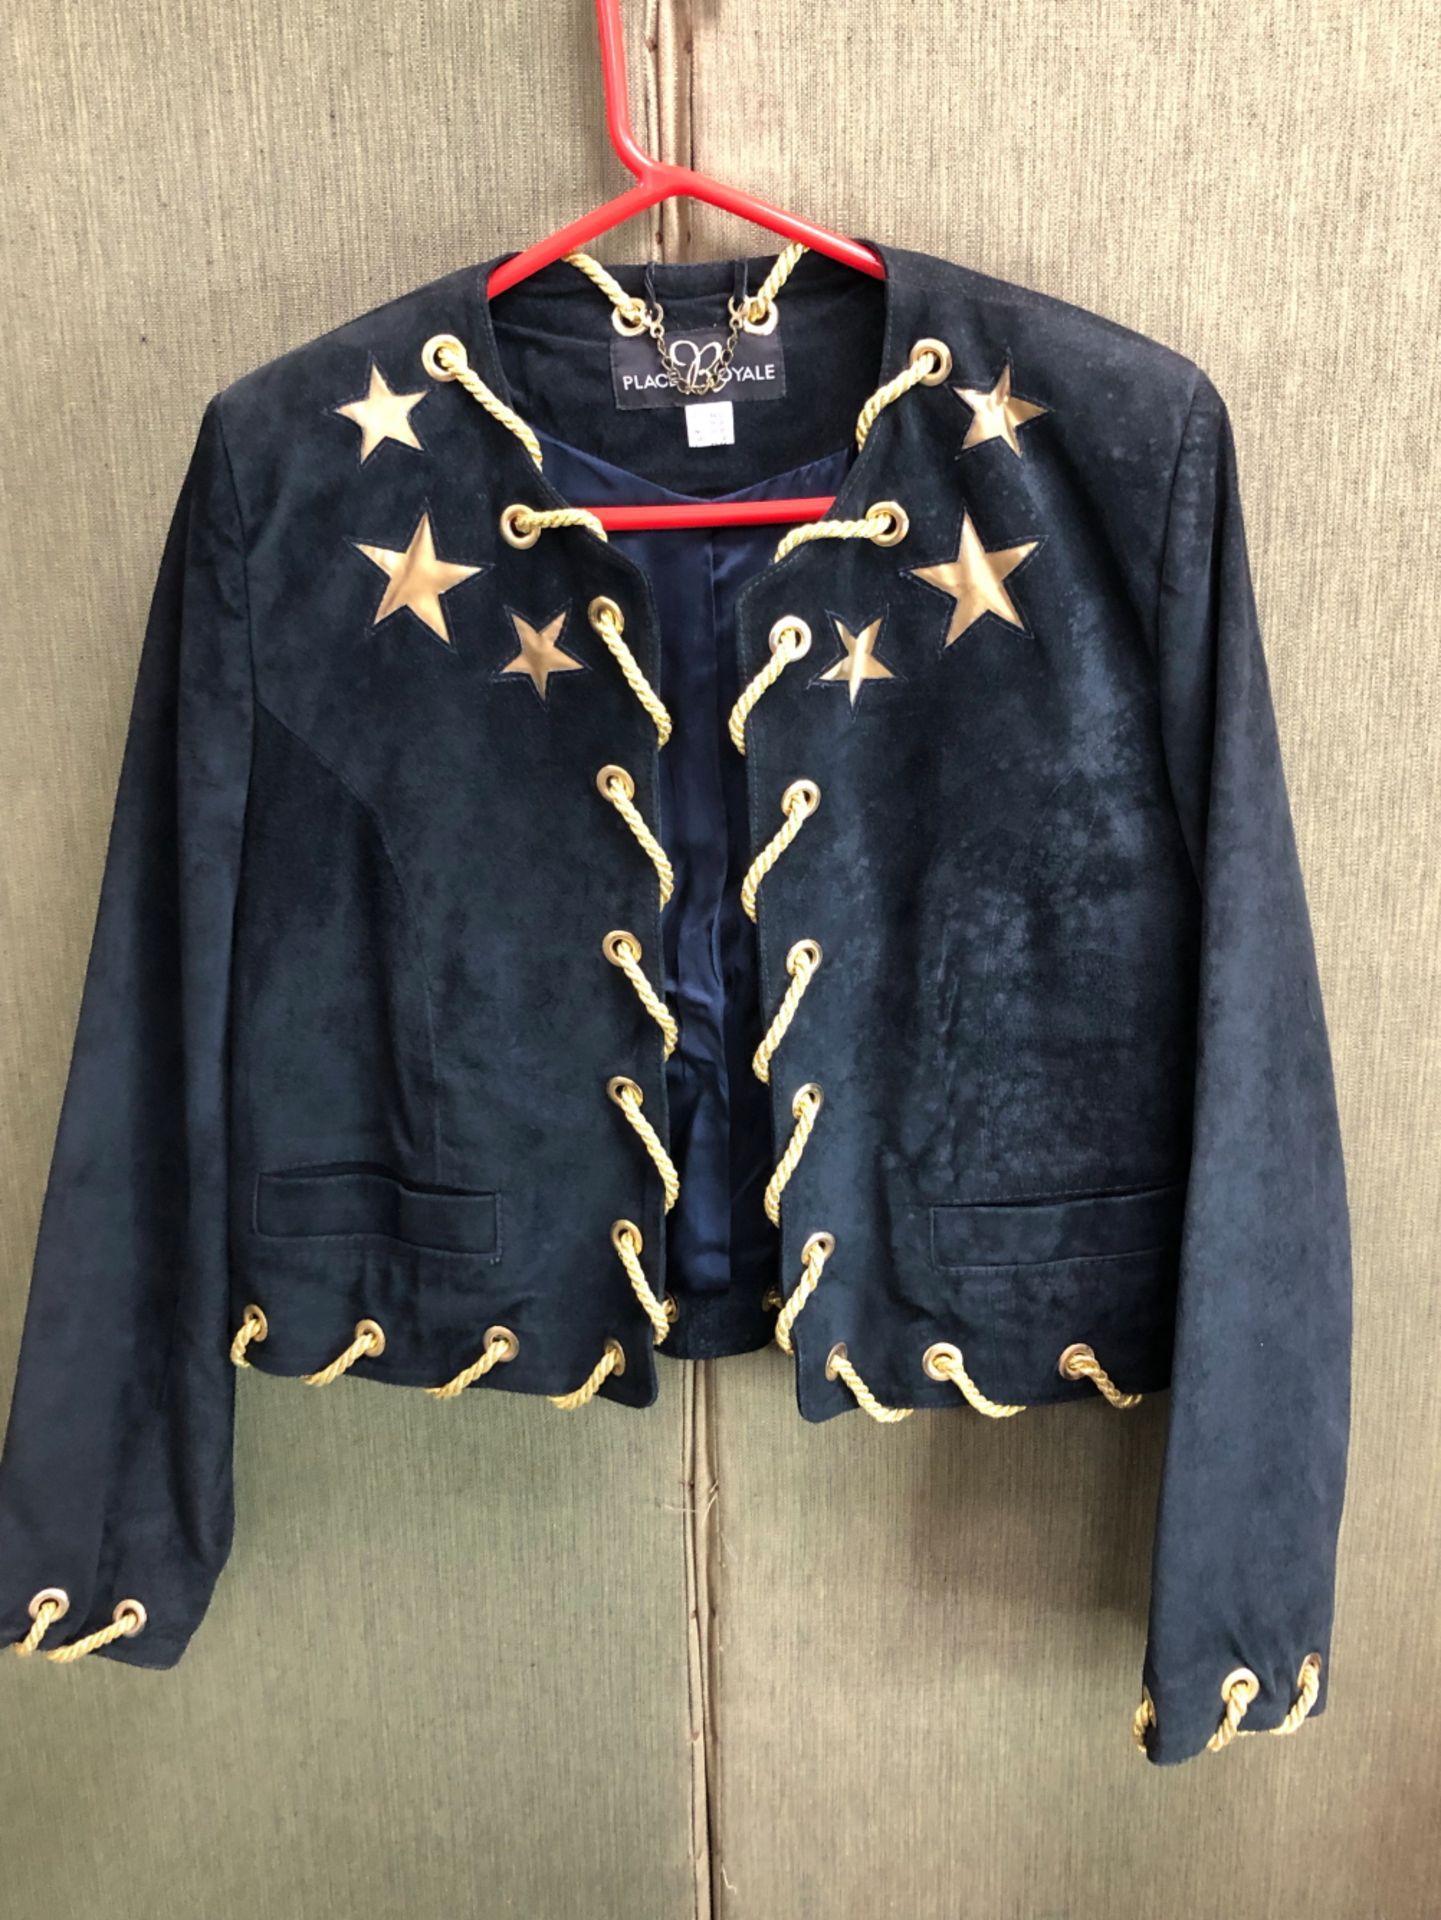 A DARK BLUE PLACE ROYALE SUEDE SHORT JACKET WITH GOLD STAR ROPE DETAIL GB 10/12